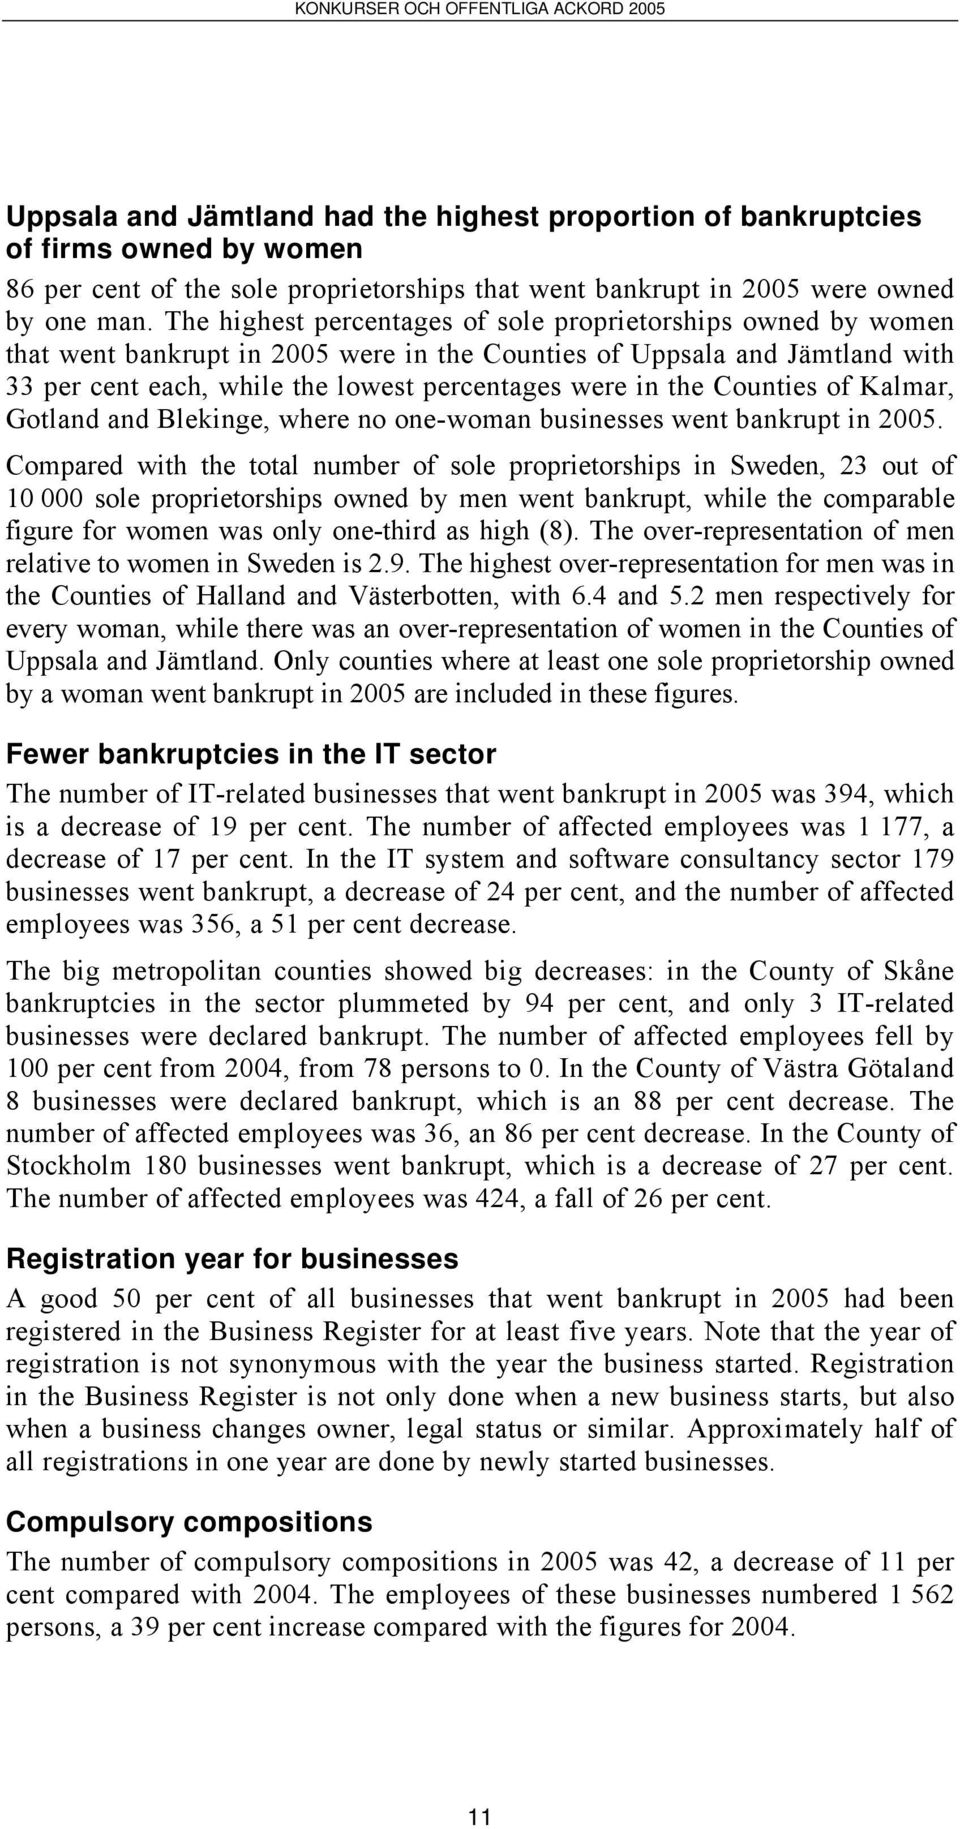 Counties of Kalmar, Gotland and Blekinge, where no onewoman businesses went bankrupt in 2005.